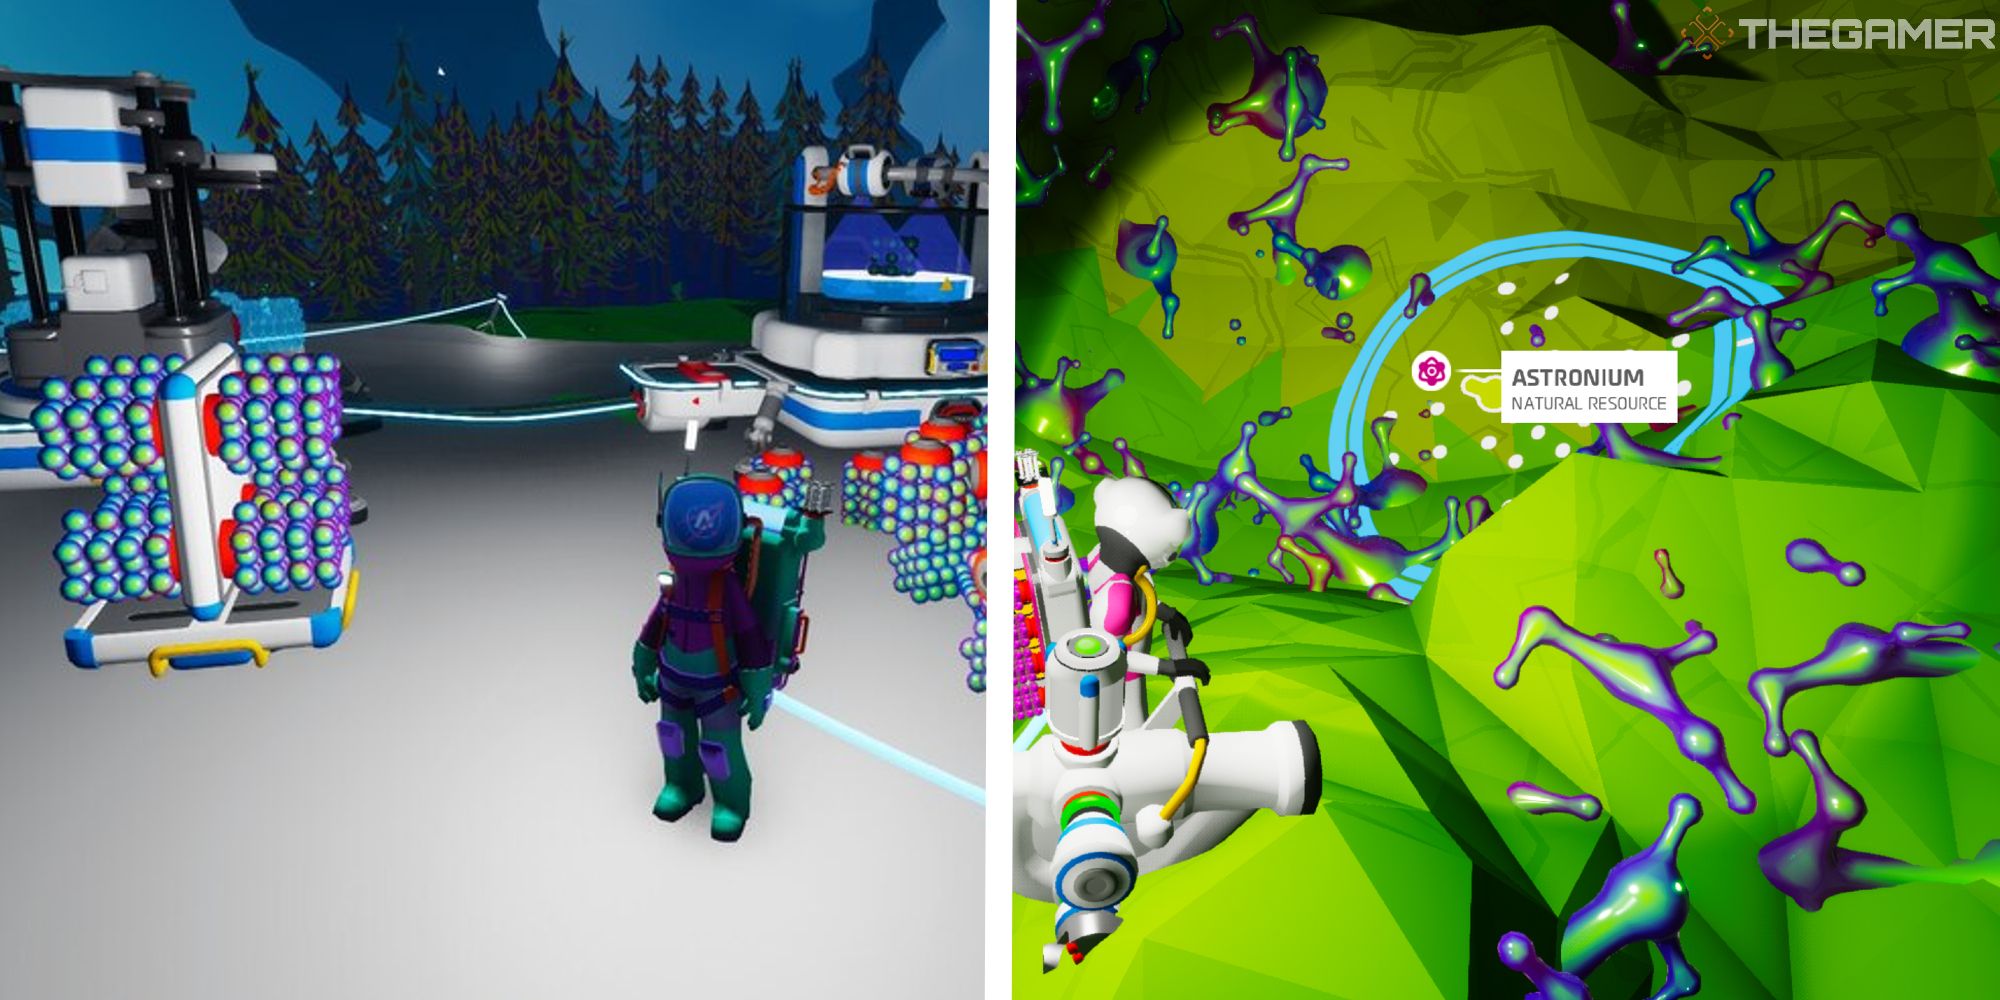 player near harvested astronium next to image of player collecting astronium from nodes